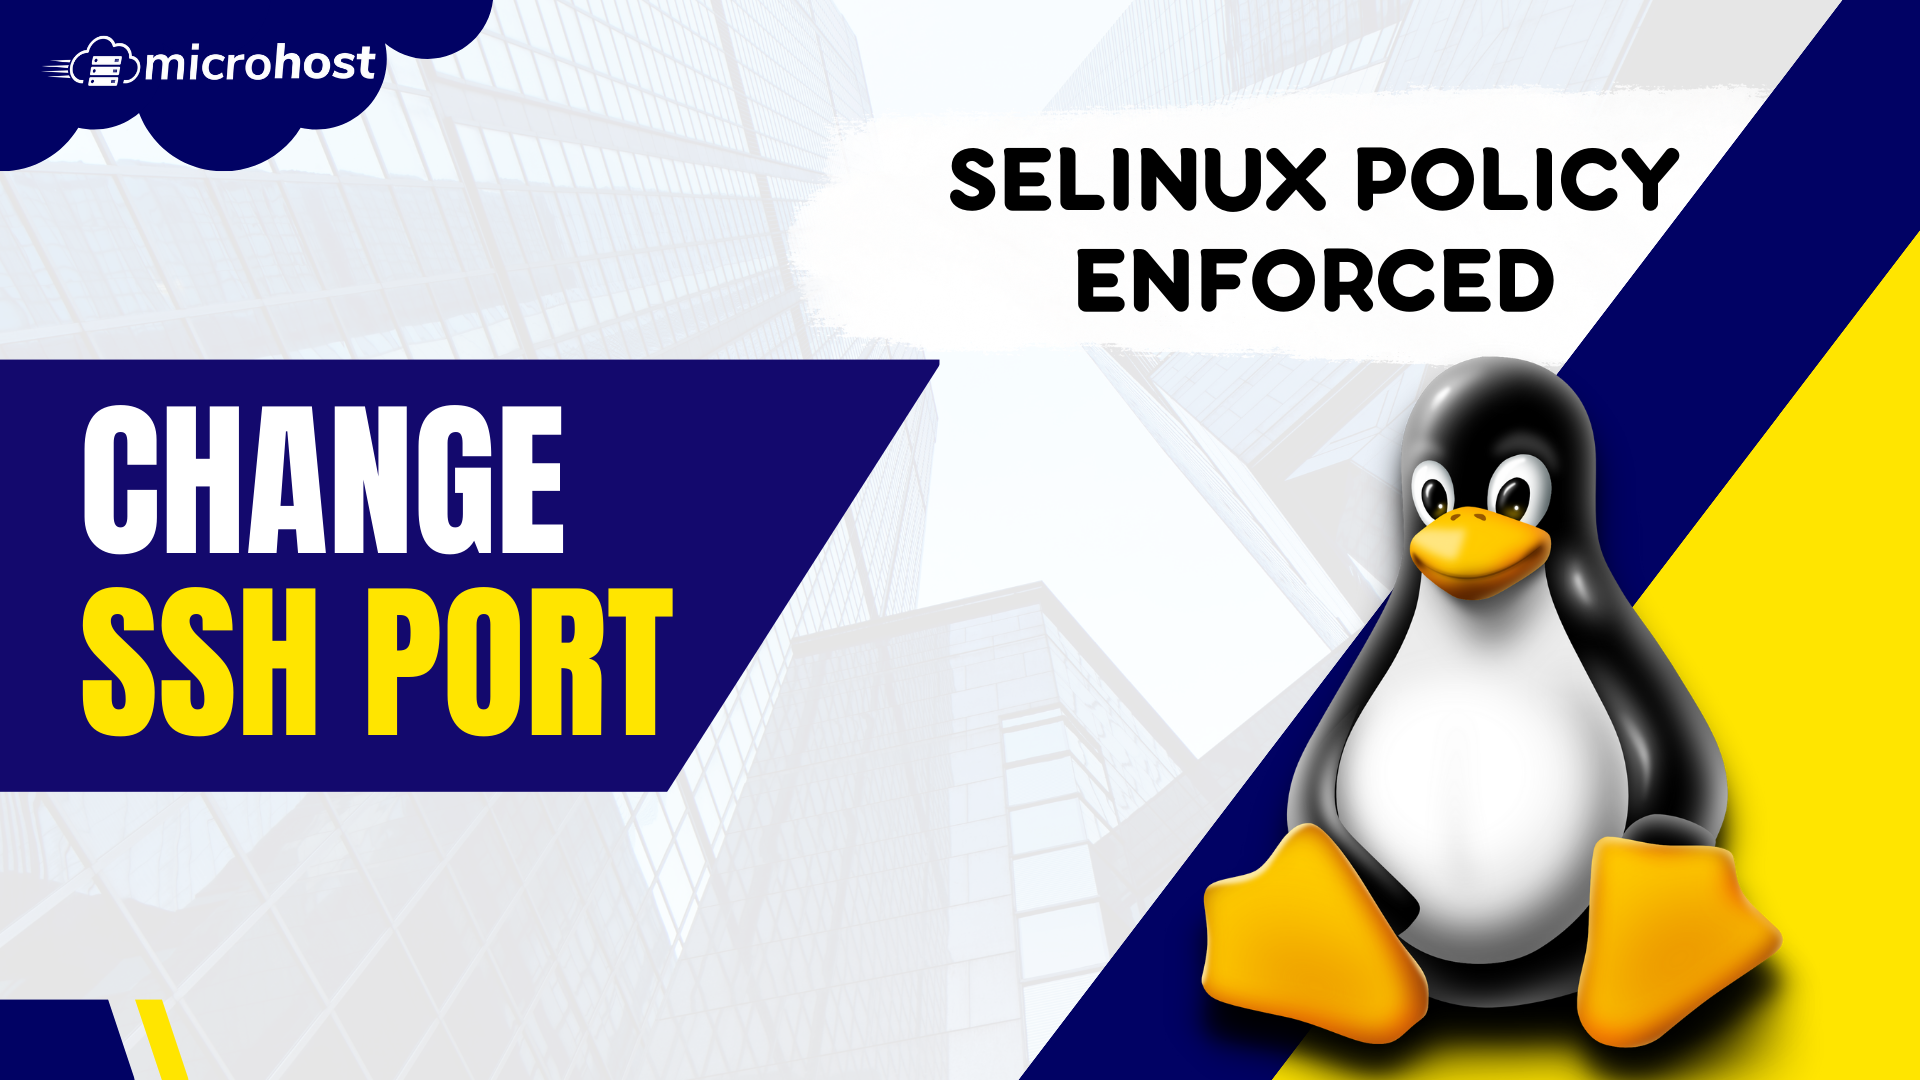 How to change SSH port when SELinux policy is enabled